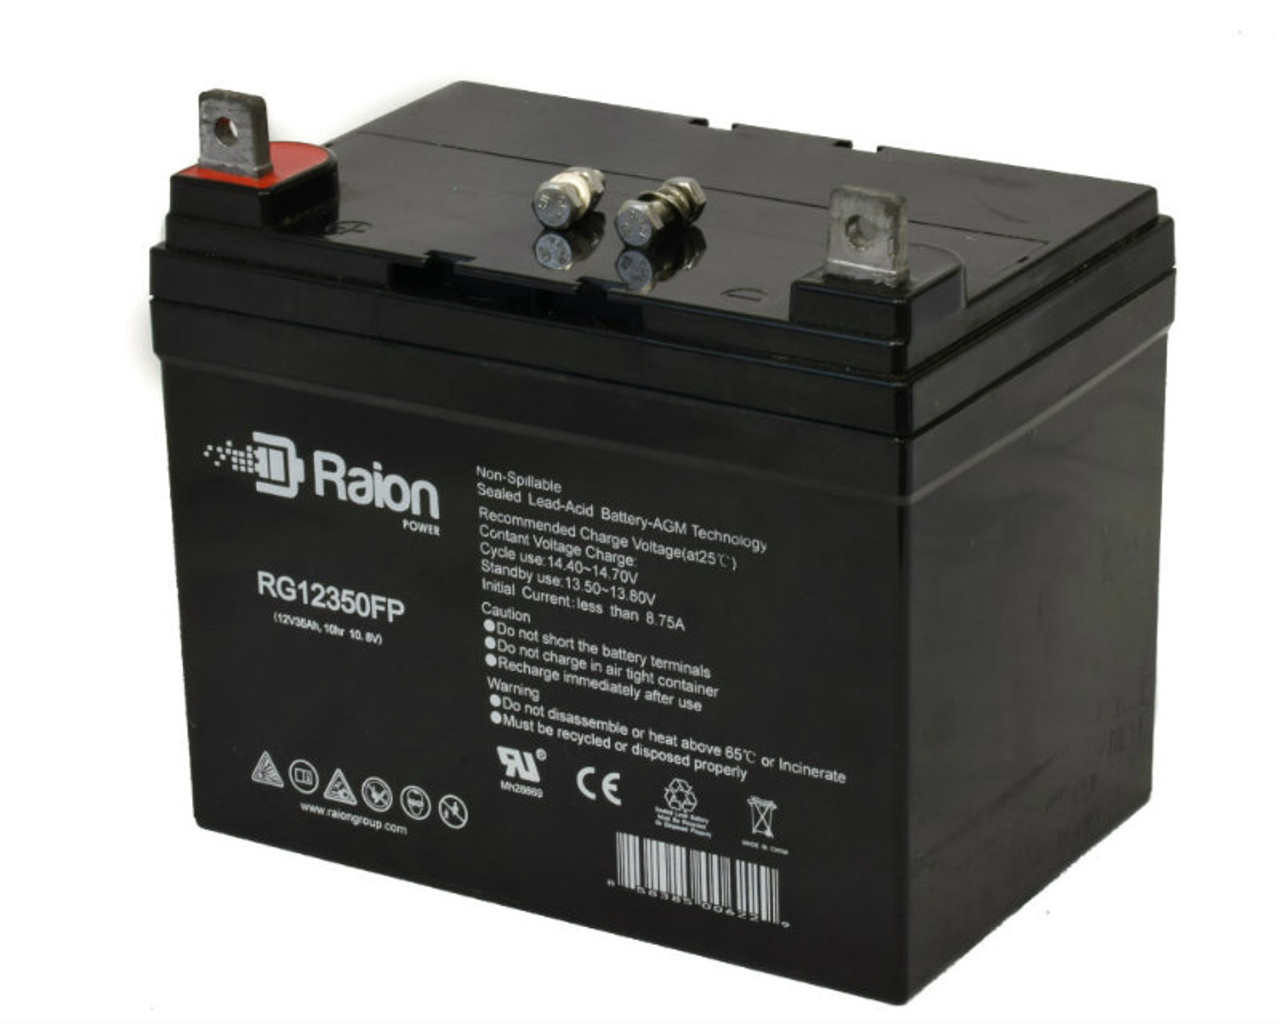 Raion Power Replacement 12V 35Ah Battery for J.I. Case & Case Ih Lawn 446 - 1 Pack